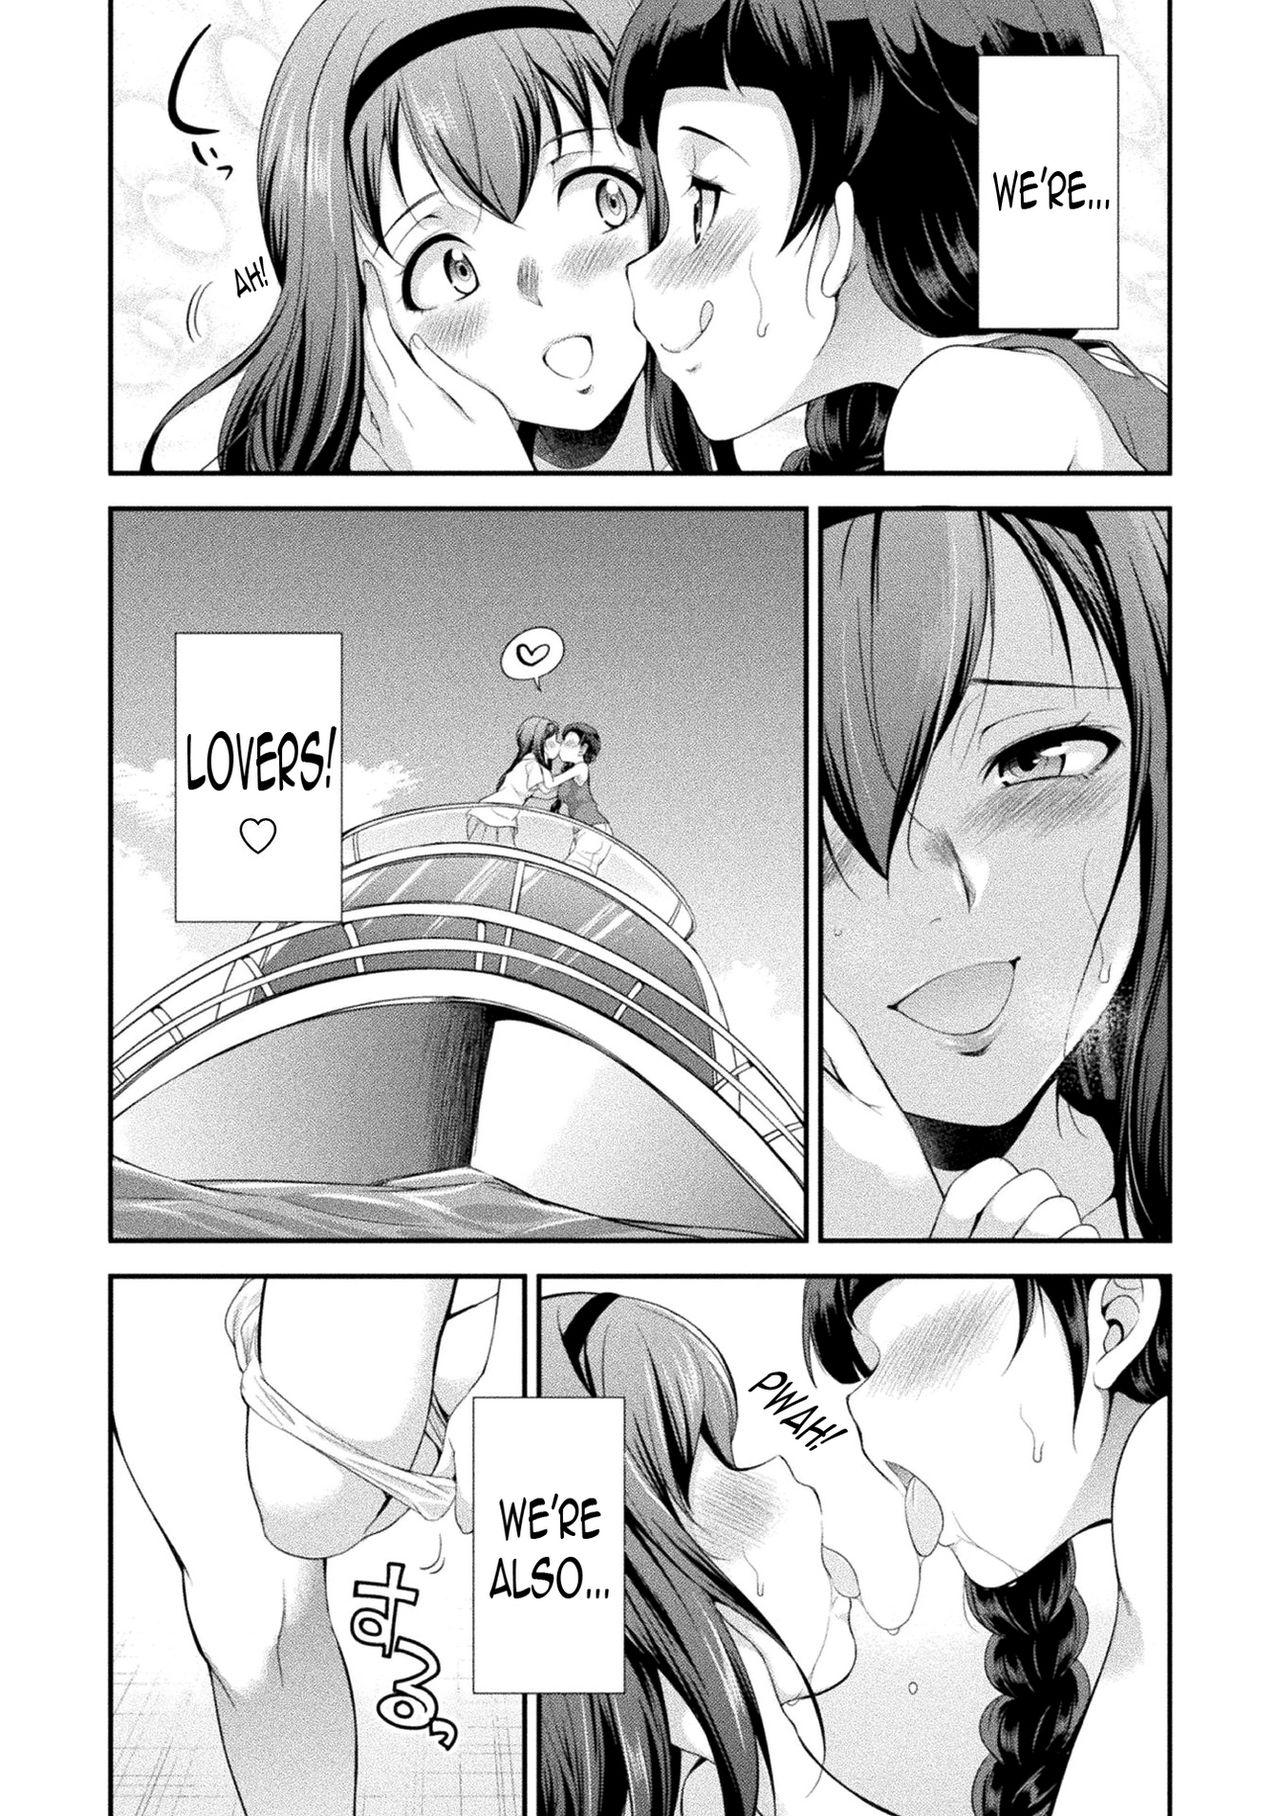 Smooth [Kaguya] Futanarijima ~The Queen of Penis~ Ch. 1 [English] [N04h] Hot Couple Sex - Page 7